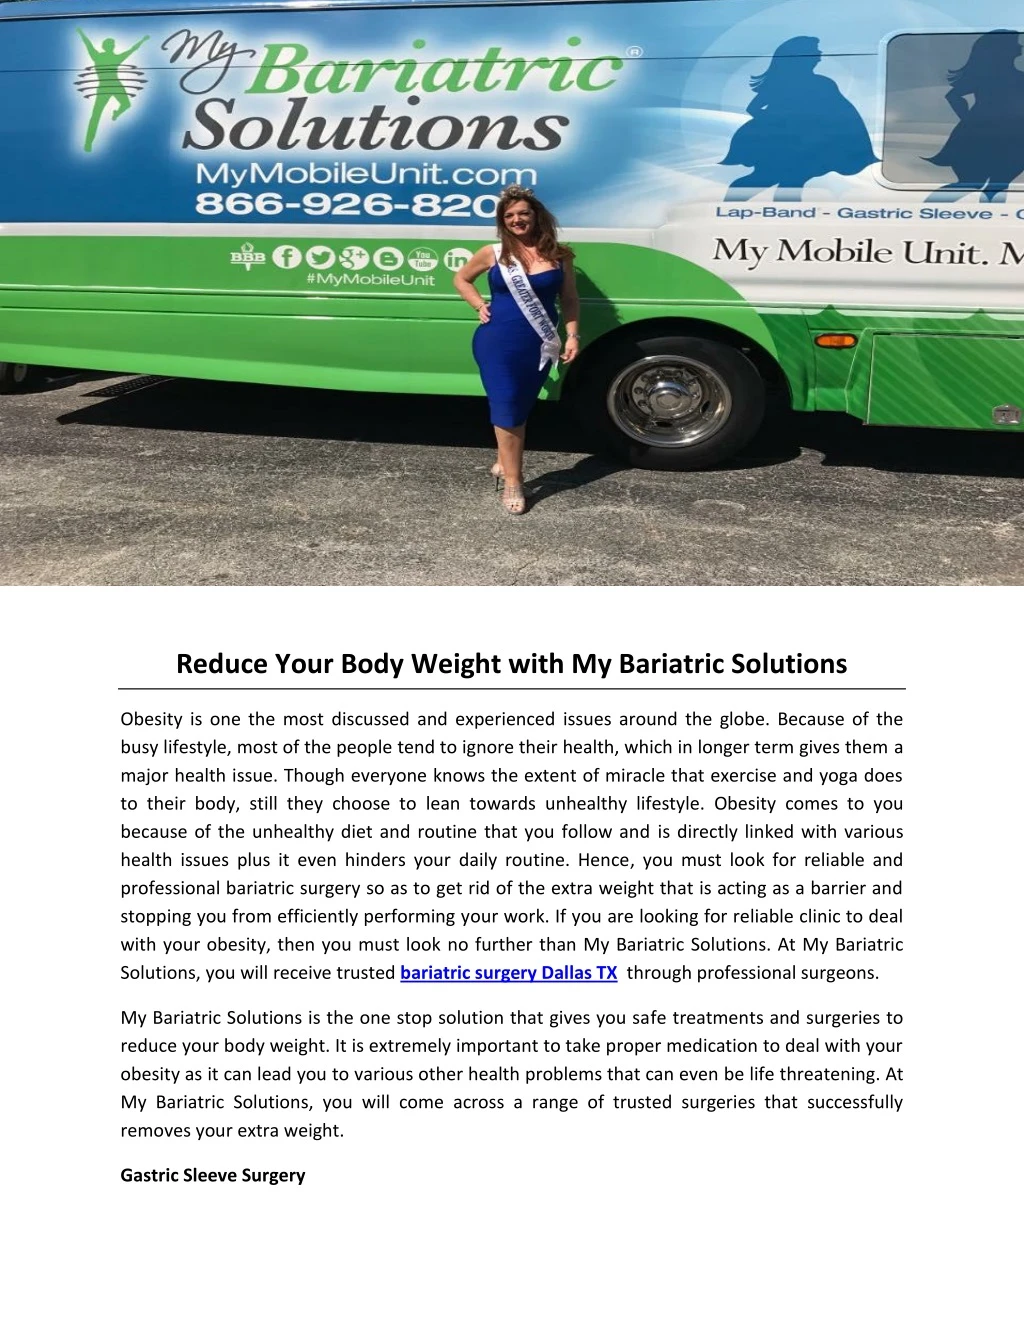 reduce your body weight with my bariatric